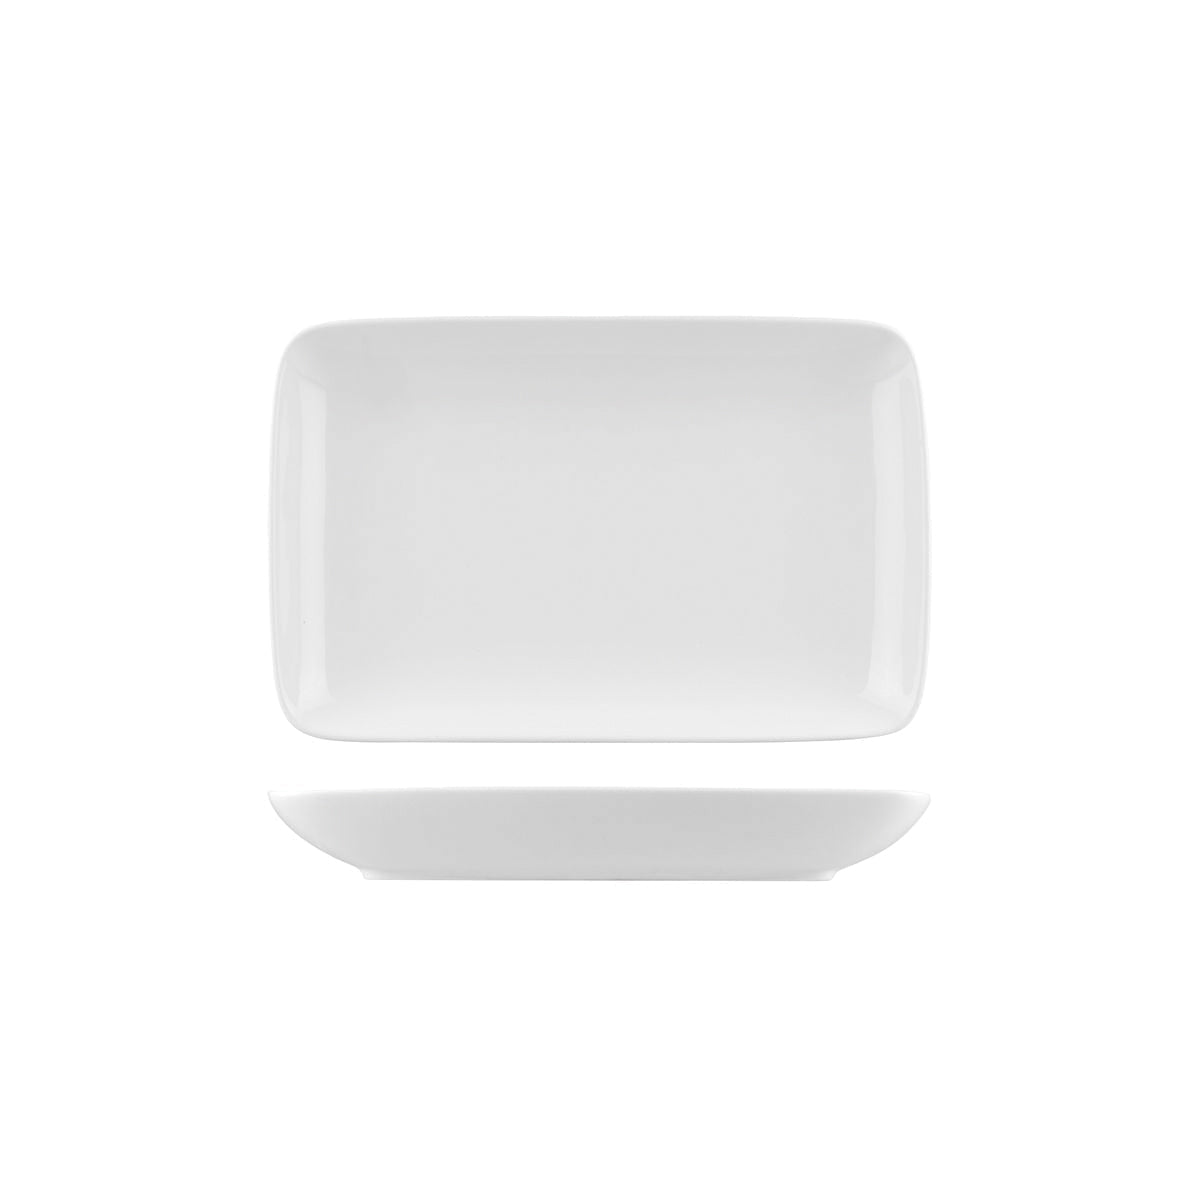 RECTANGULAR COUPE PLATE- 314mm, Bistro